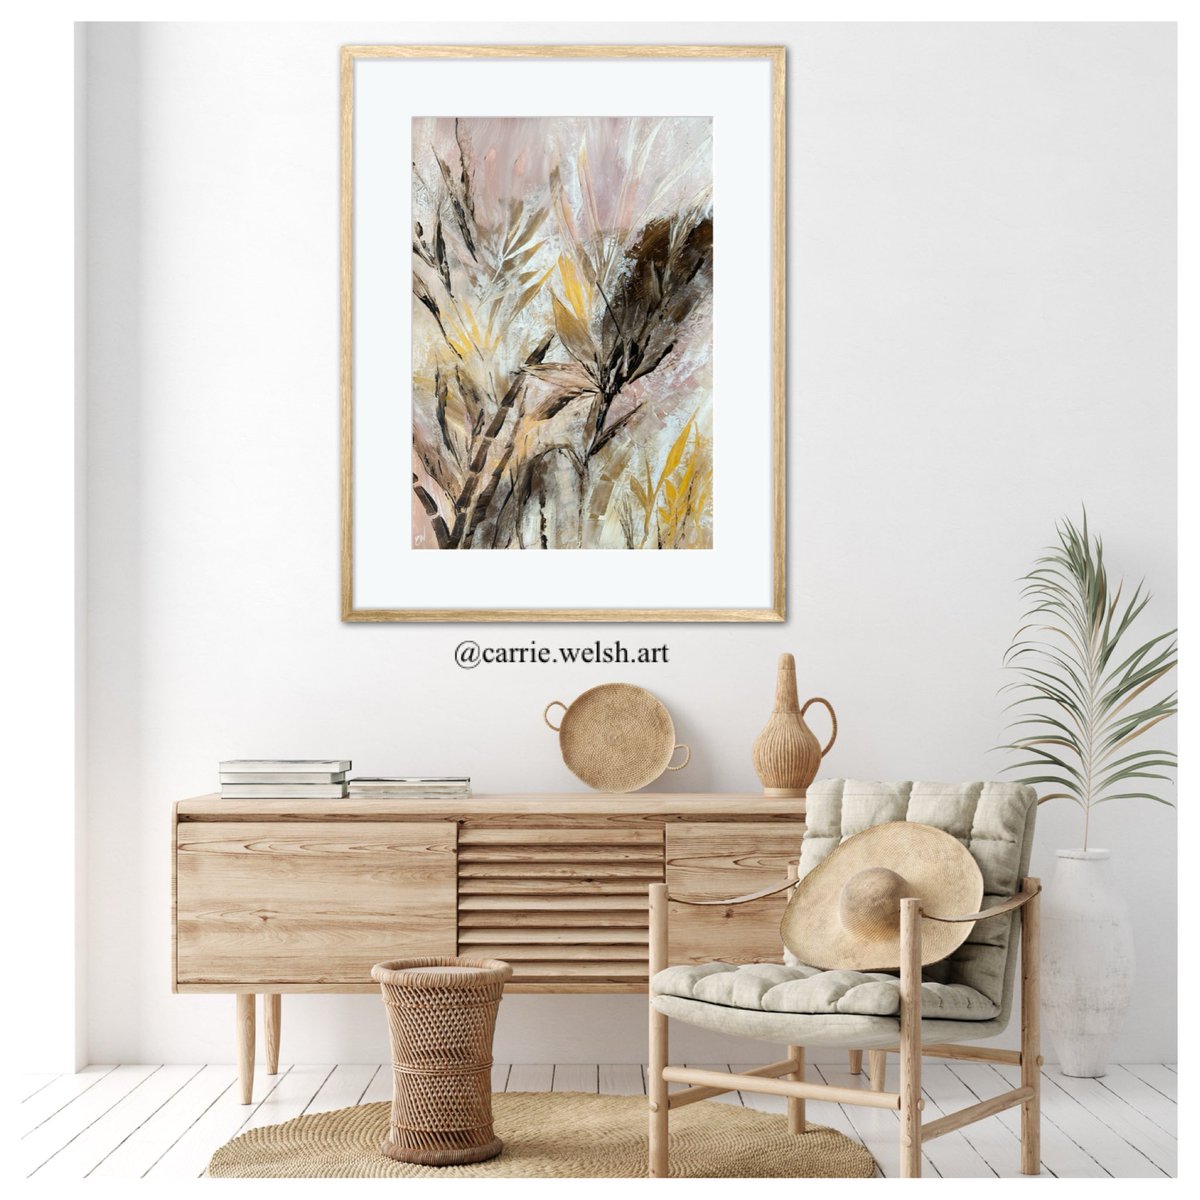 New! “Sunlit Afternoon” is a beautiful abstract botanical painting. 59.4 x 42 cm (A2 size) Acrylic on paper. Frame not included. Afterpay available and free shipping in Australia! 🧡 Shop here: carriewelshart.com.au/collections/or…